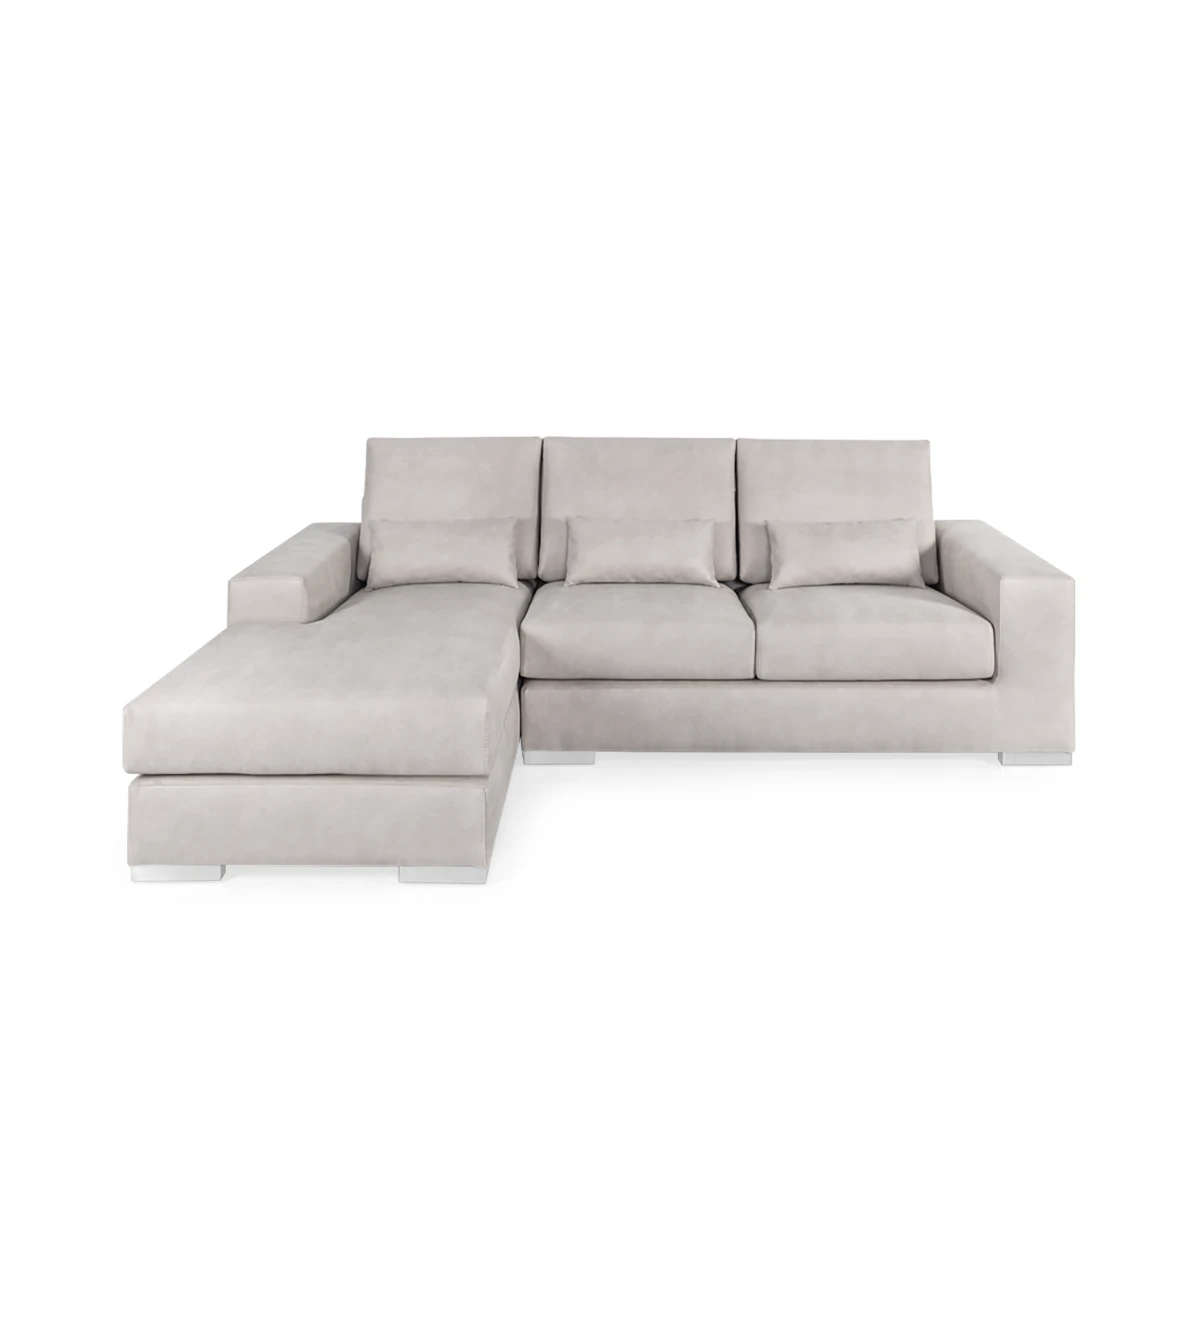 2-seater sofa with chaiselongue, upholstered in fabric.